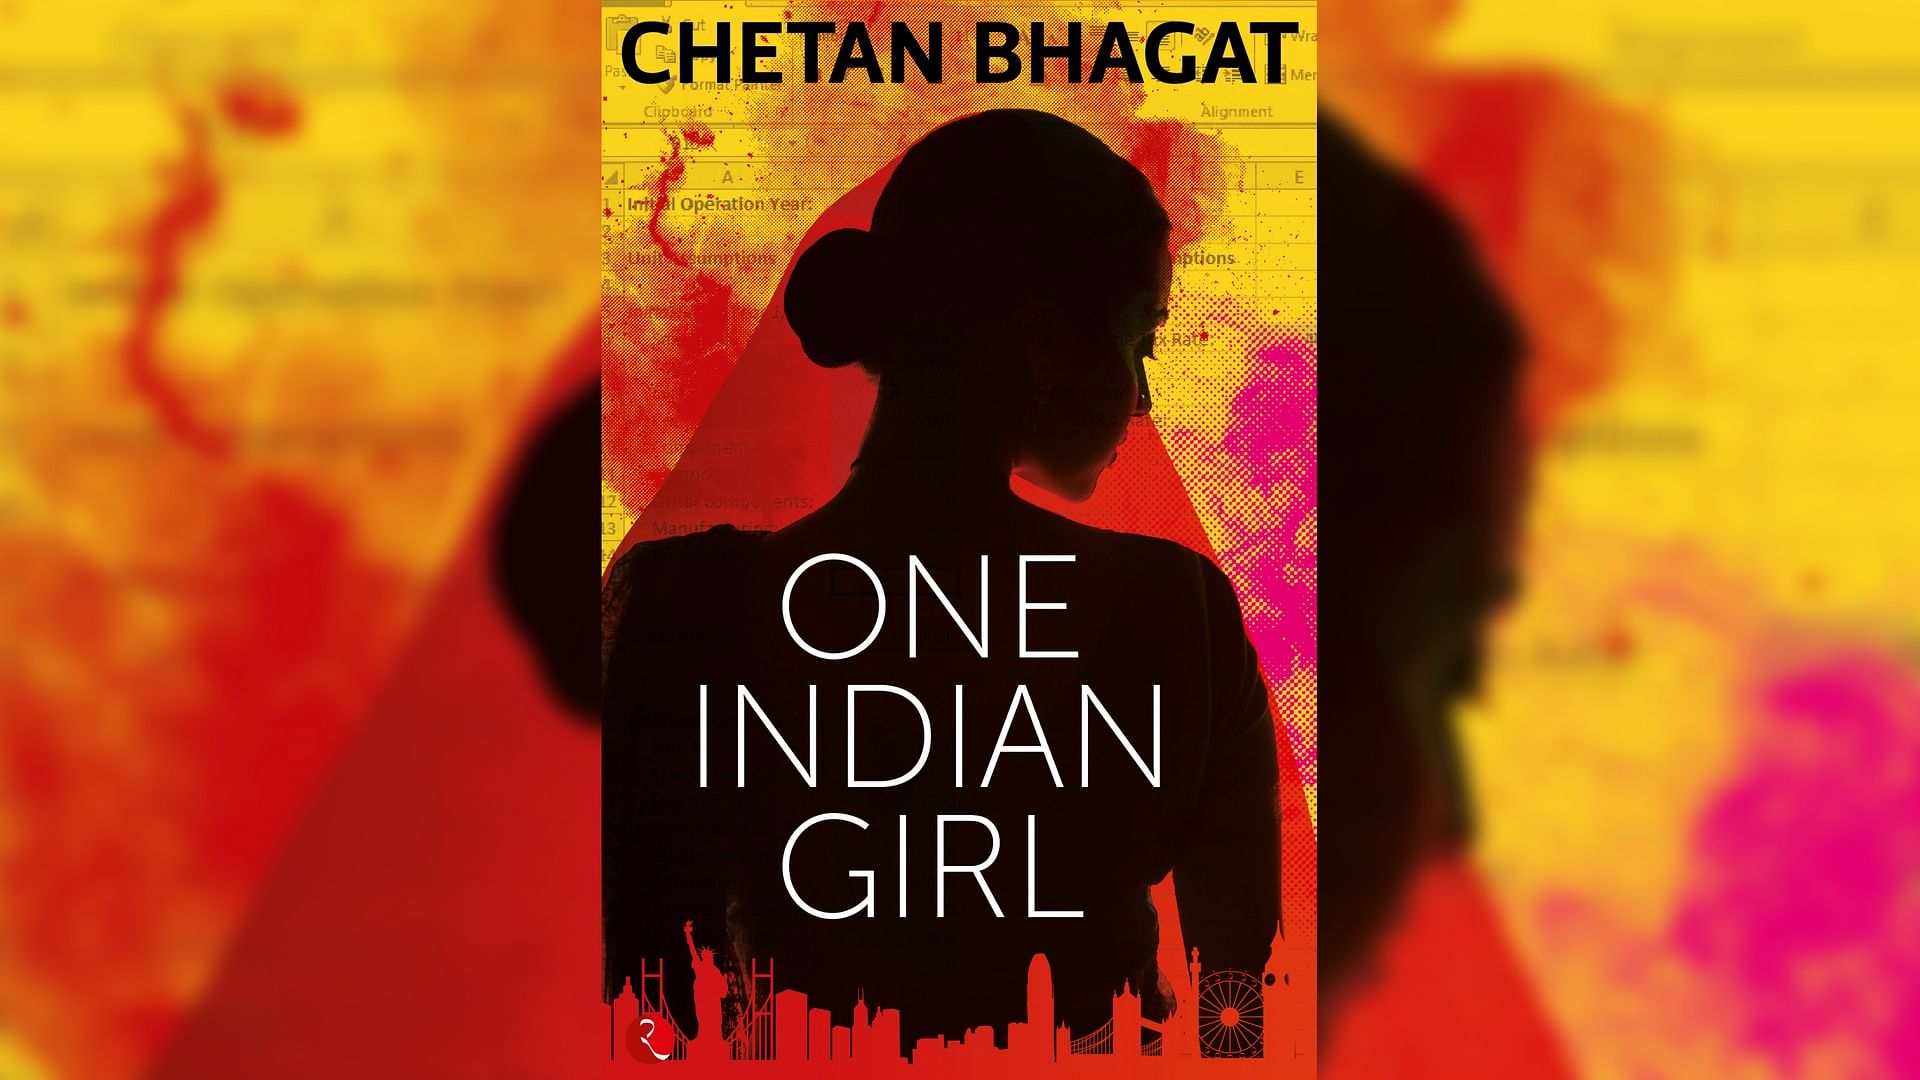 Chetan Bhakat is out with his latest book, ‘<i>One Indian Girl</i>’.&nbsp;